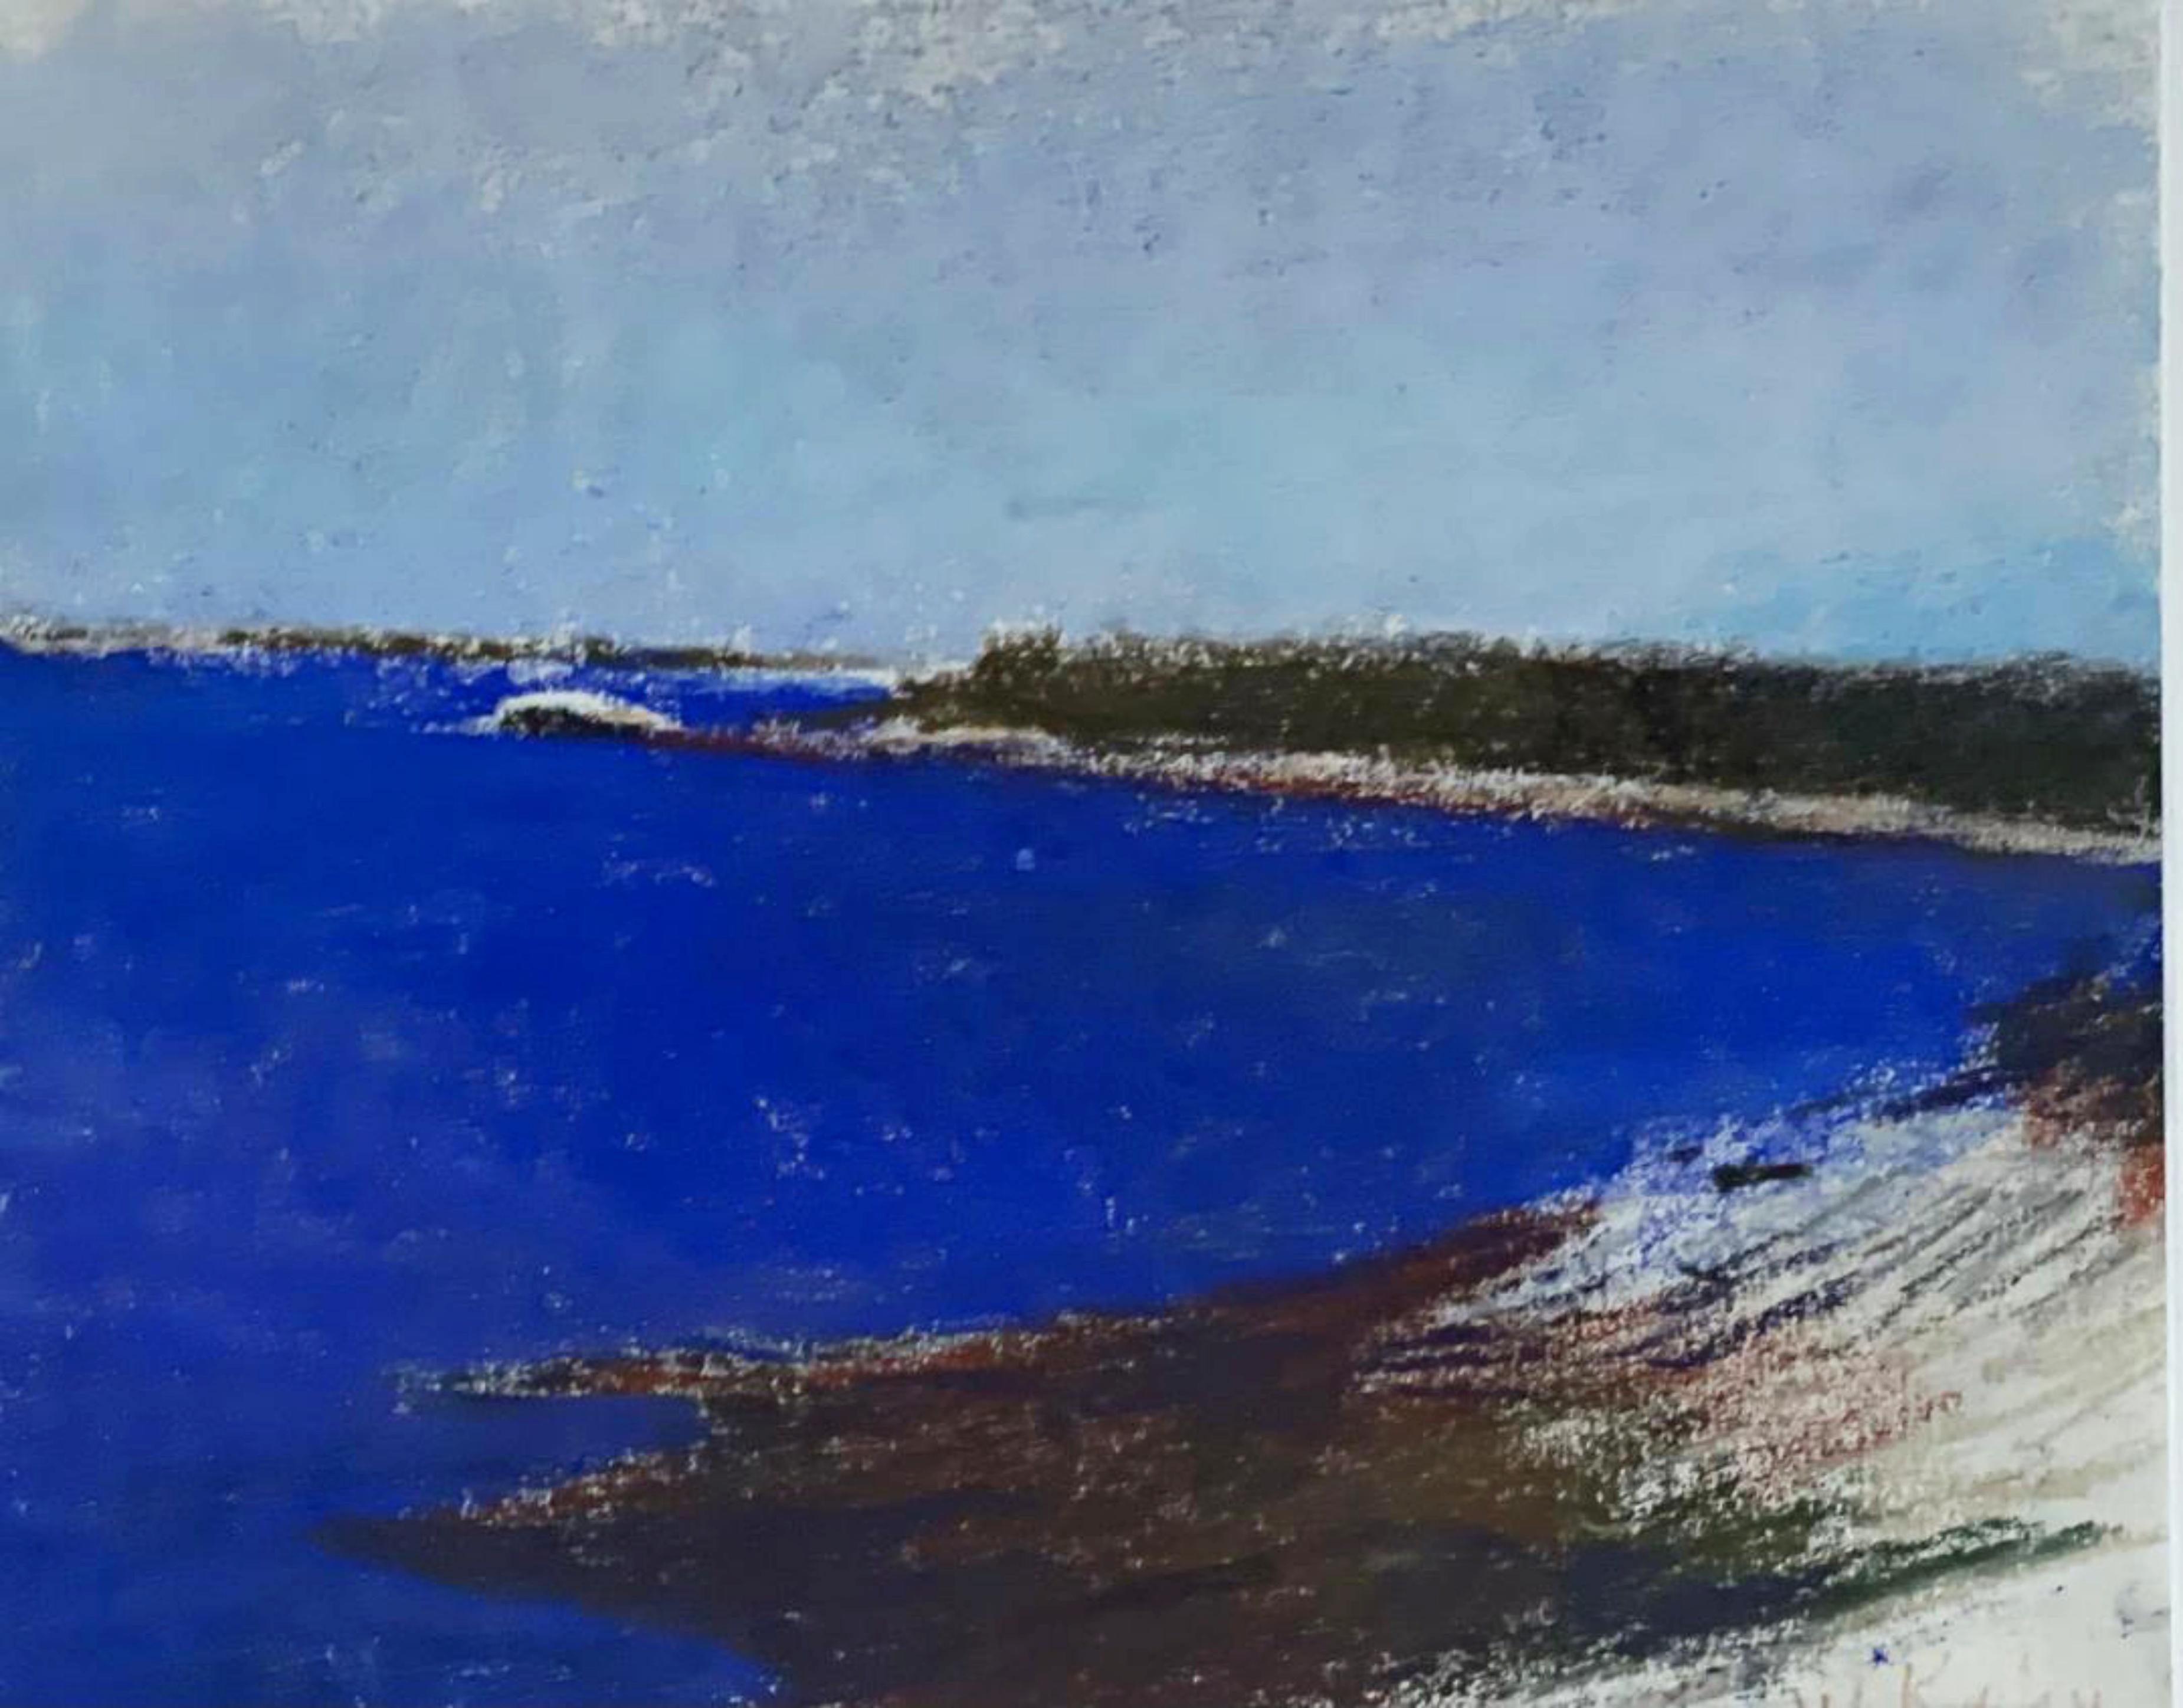 Wolf Kahn Landscape Art - The Densest Blue of Maine Water (de-accessioned from the Nevada Art Museum)